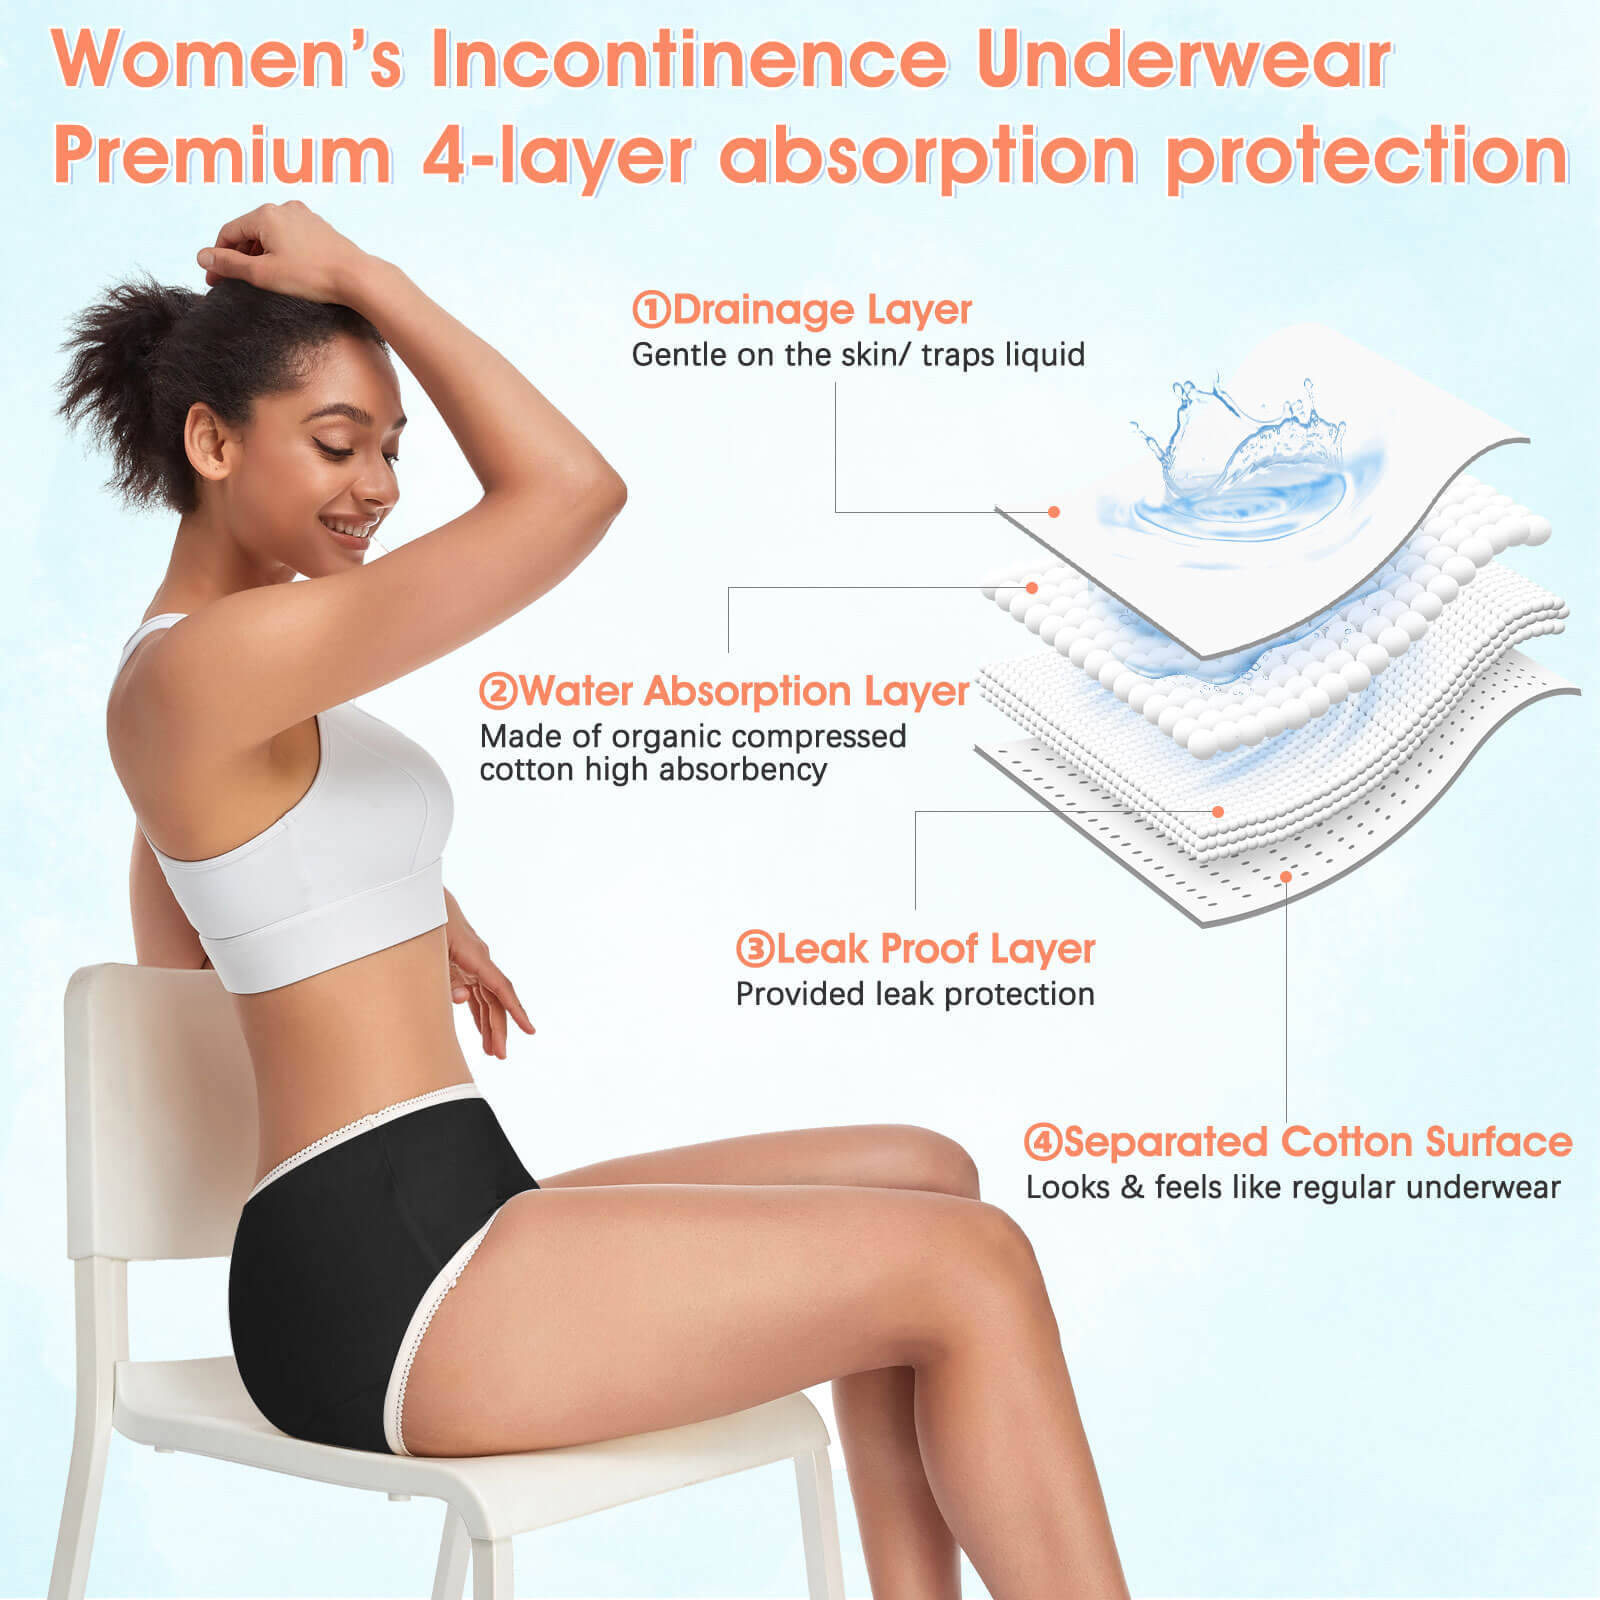 Incontinence Underwear for Women Protective Leakproof Moderate Absorbency Washable Breathable - SJK01(Black)